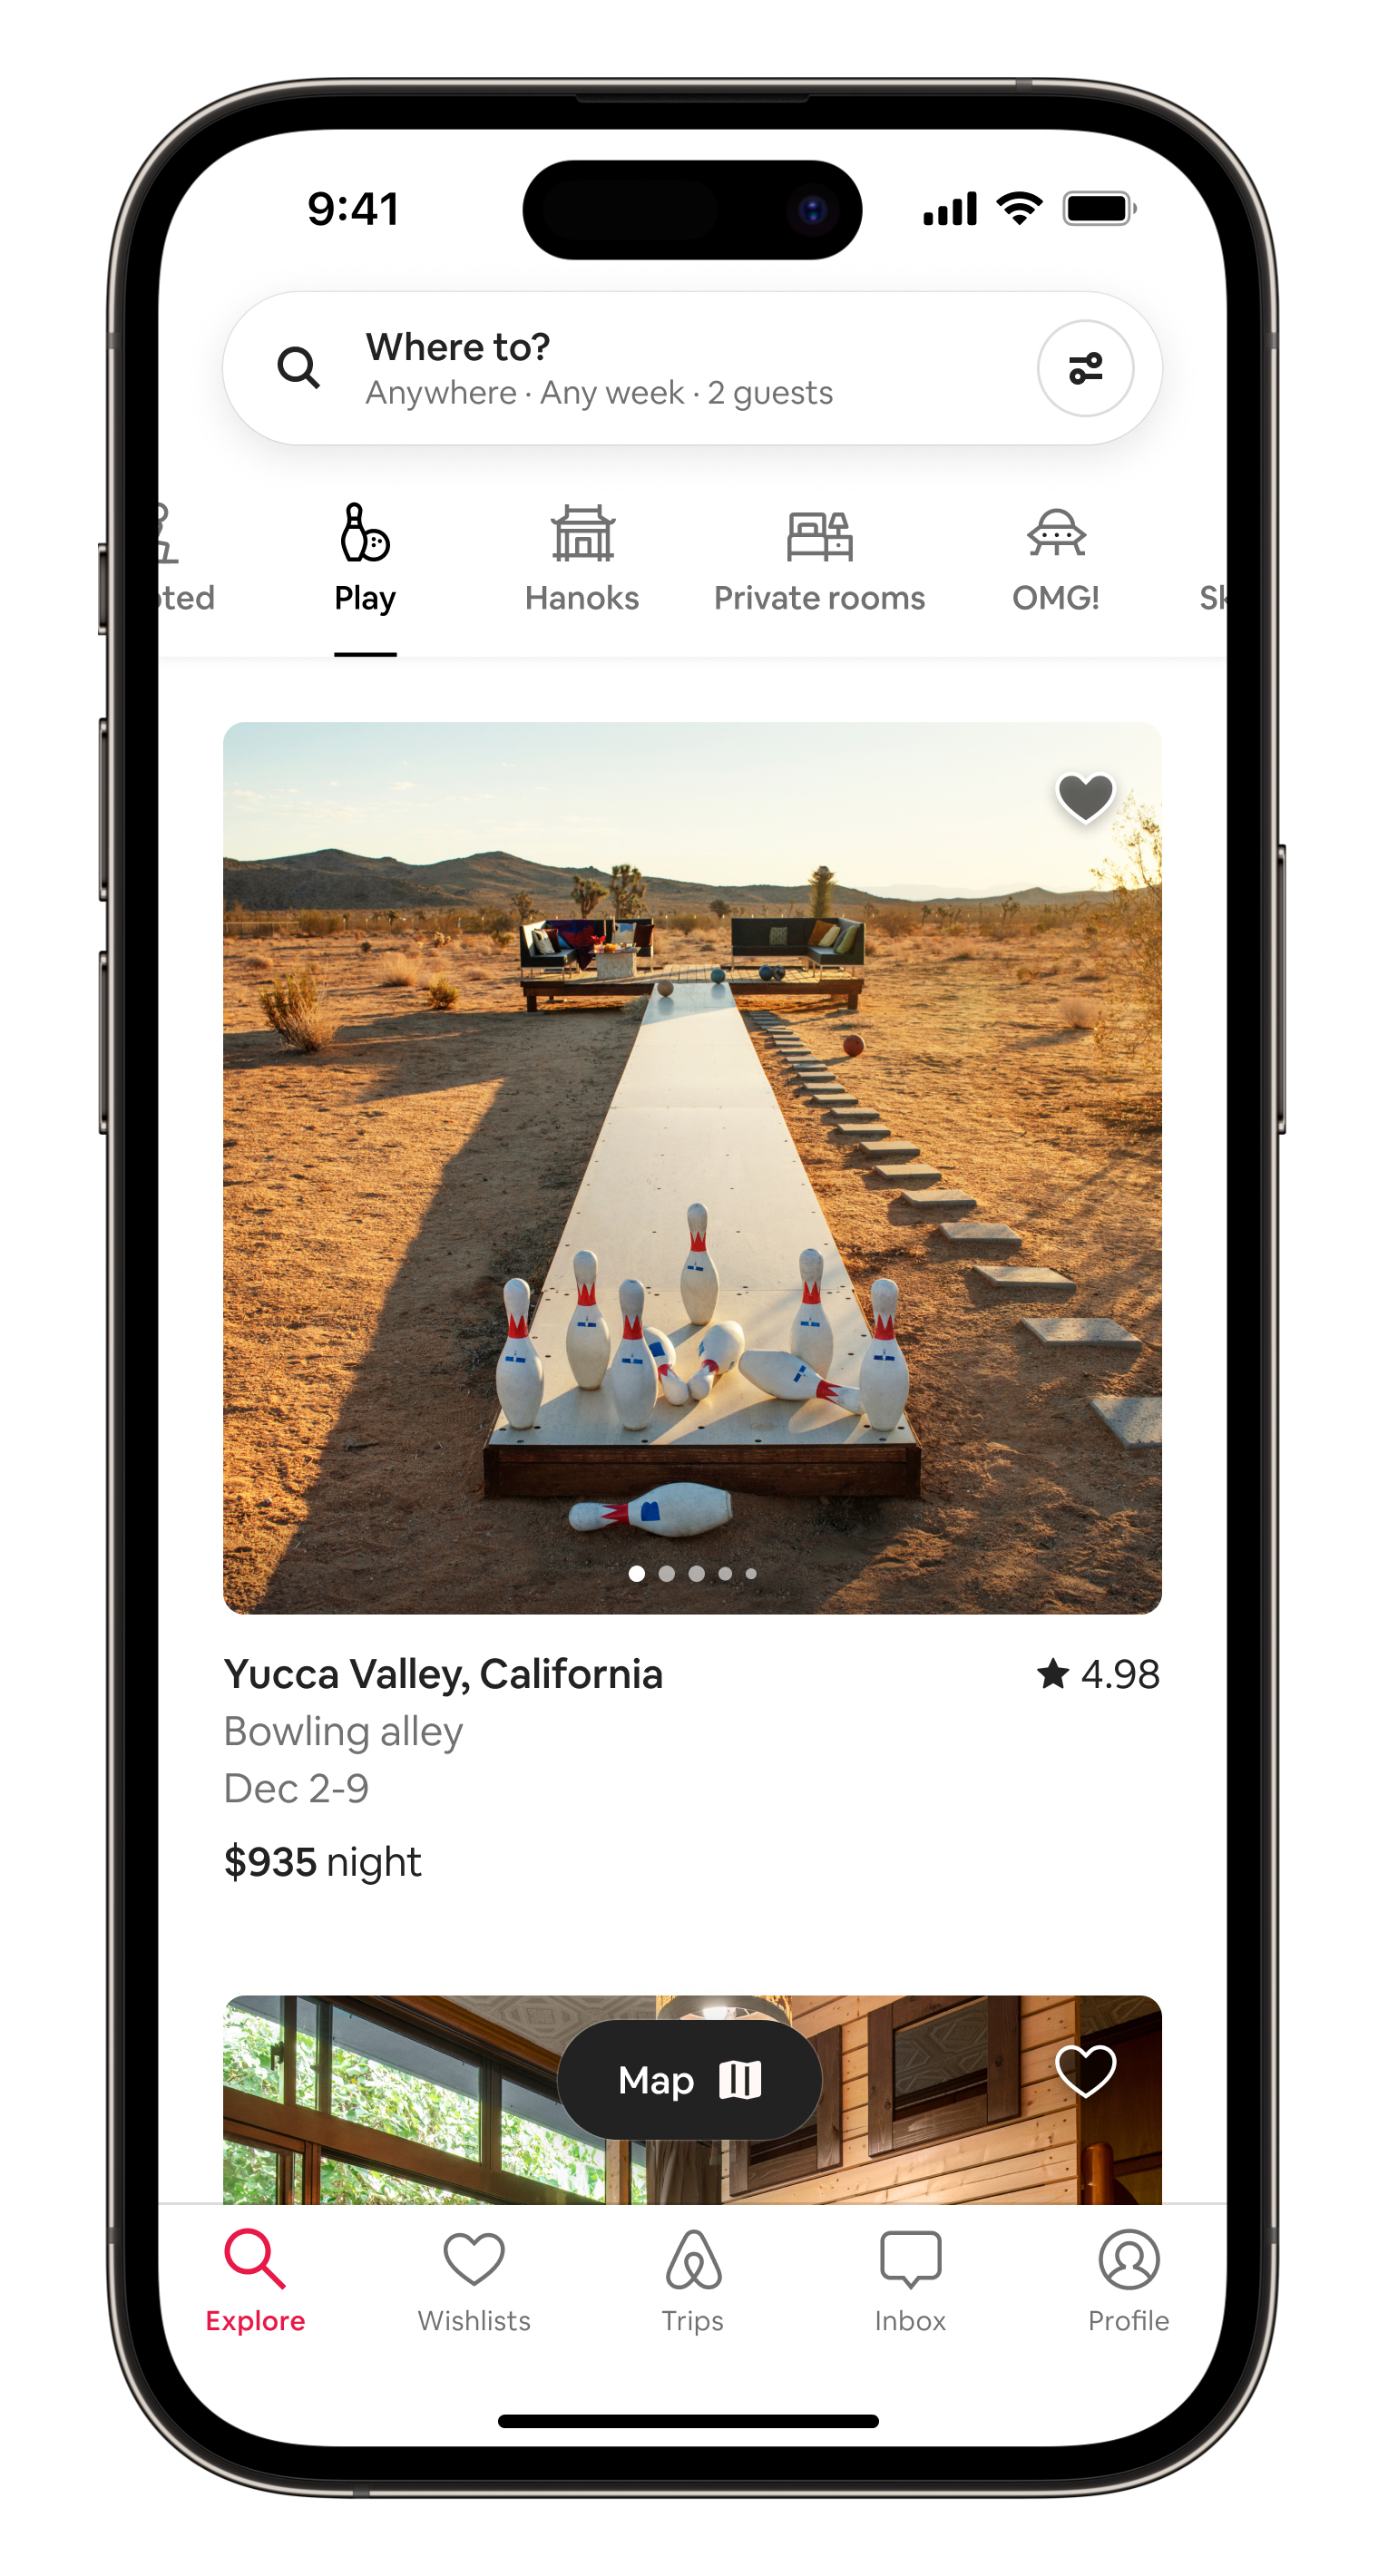 Airbnb Categories product in situ within an iPhone device showing the Play Category. The screen shows a life-sized bowling lane situated in the yard of a desert stay in Yucca Valley, California.